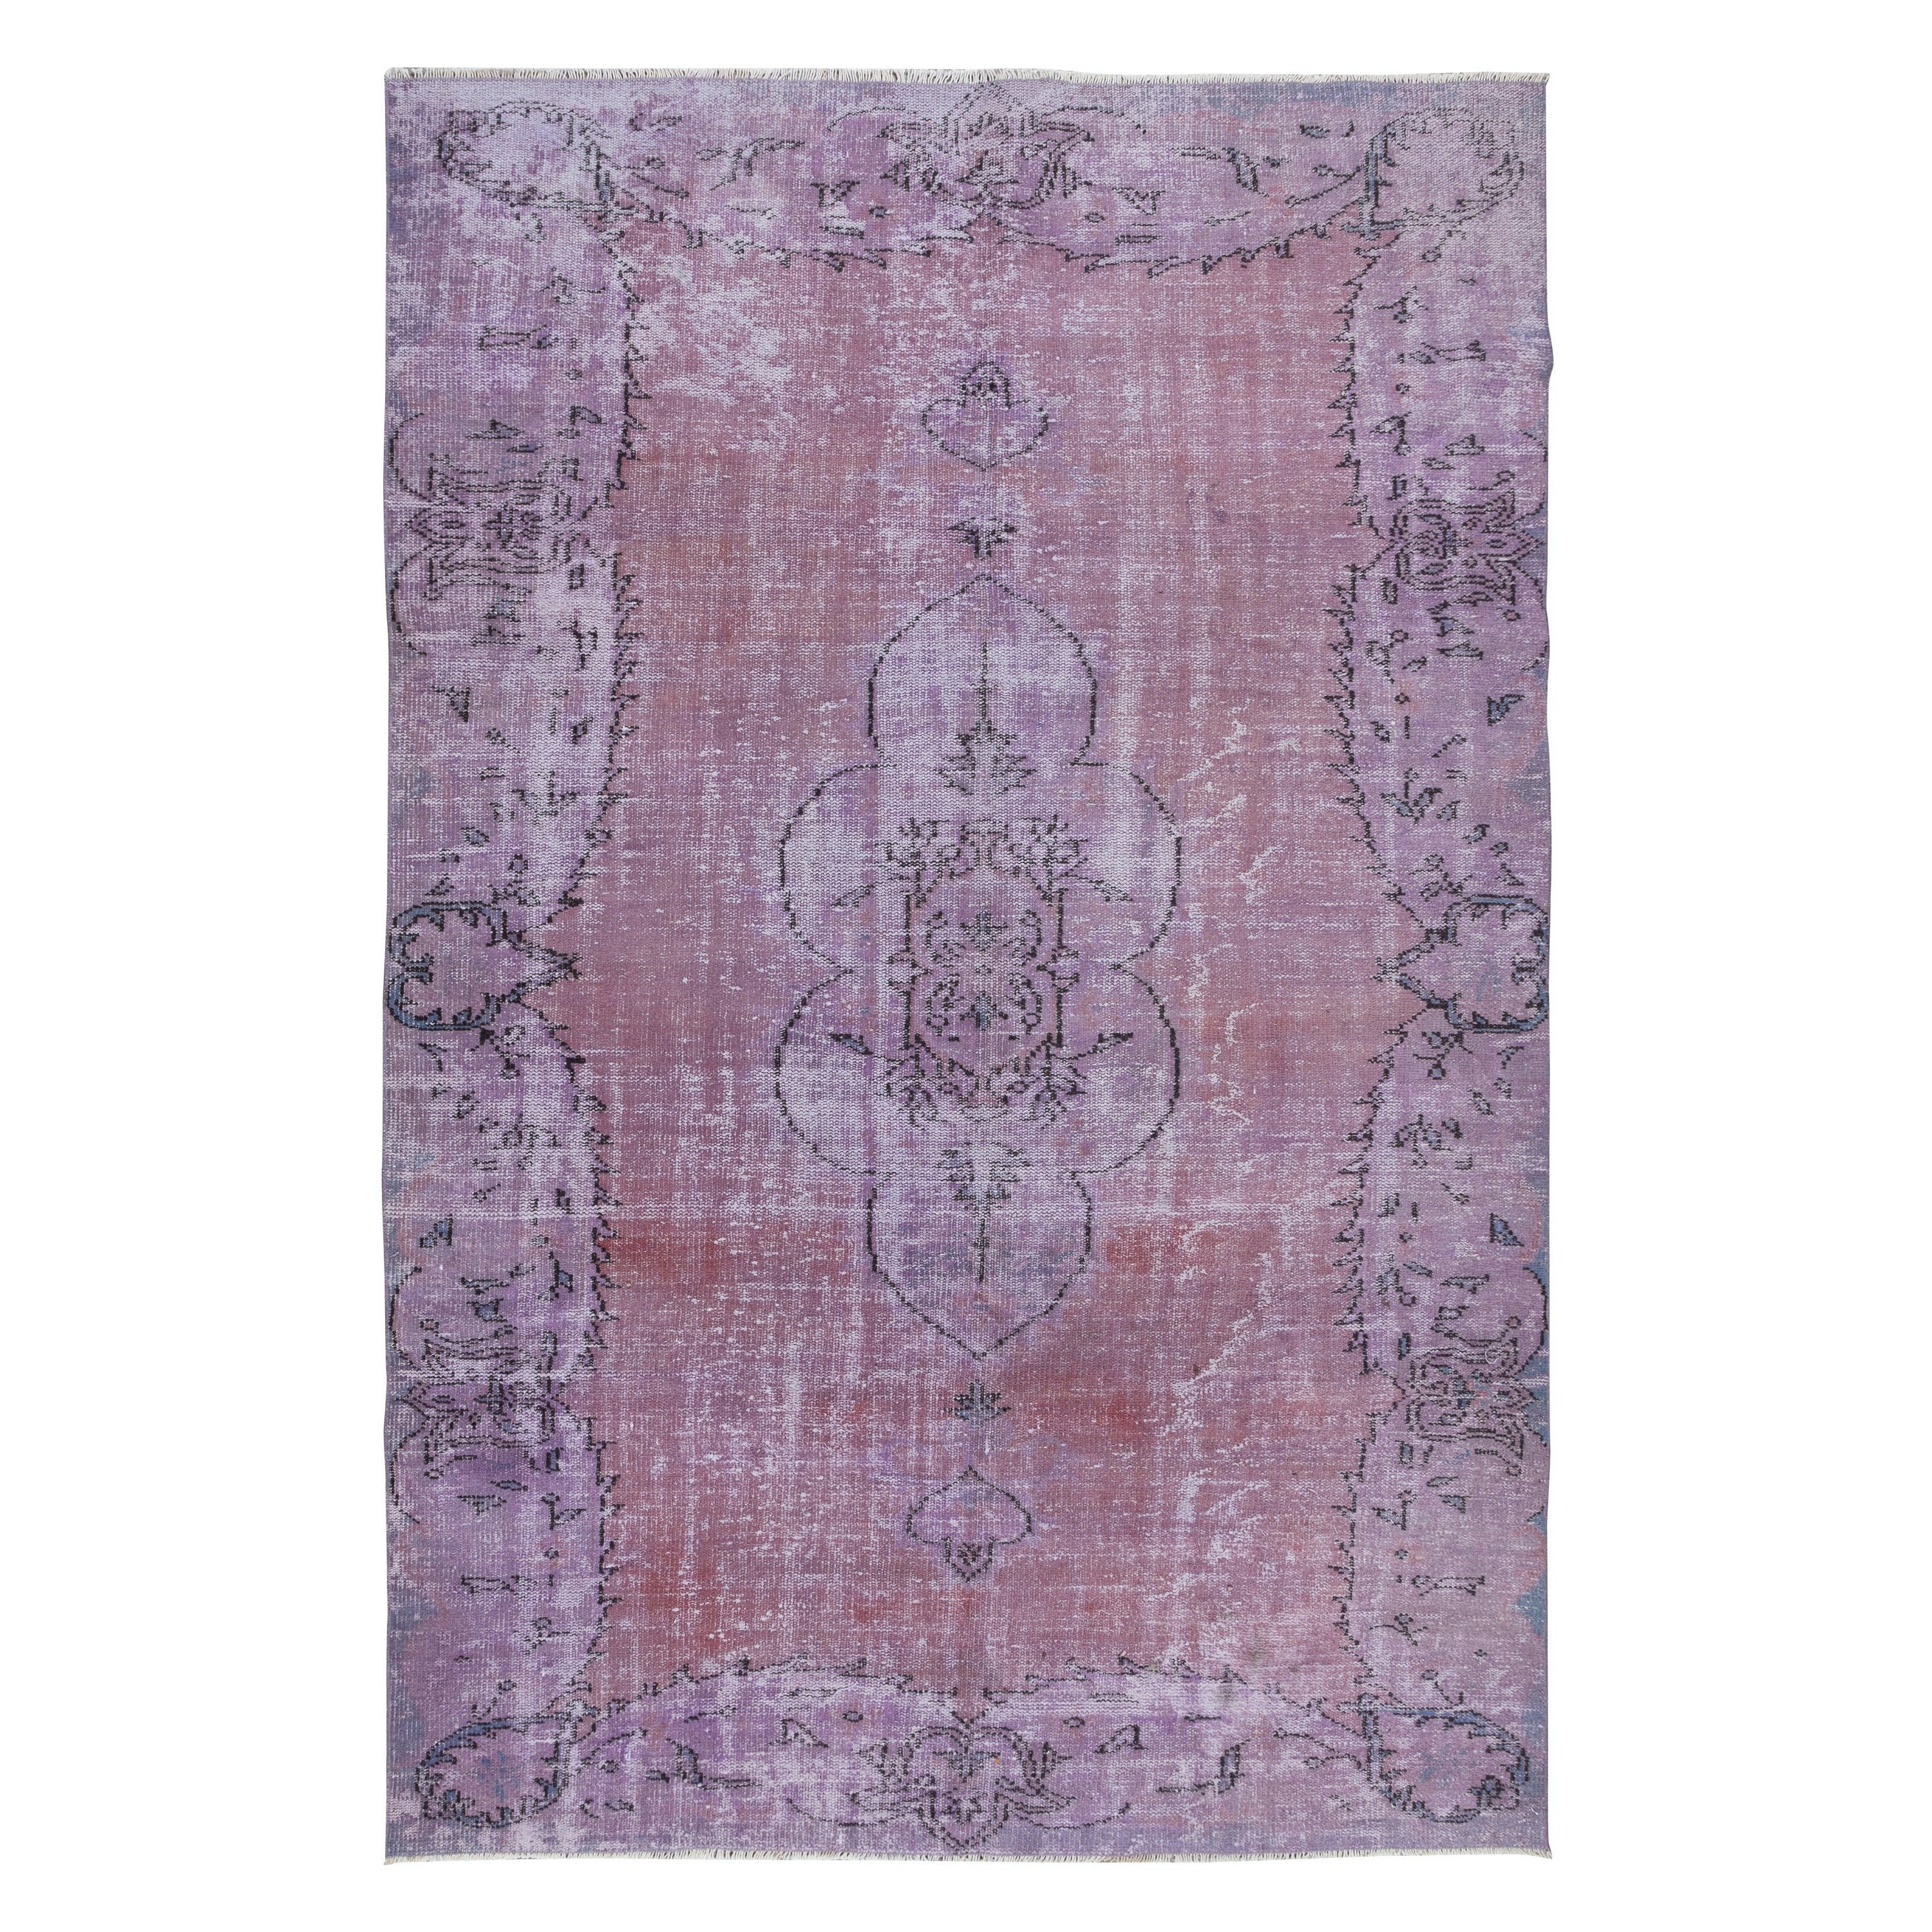 6.2x9.4 Ft Ethnic Handmade Turkish Rug in Lilac Purple for Living Room Decor For Sale